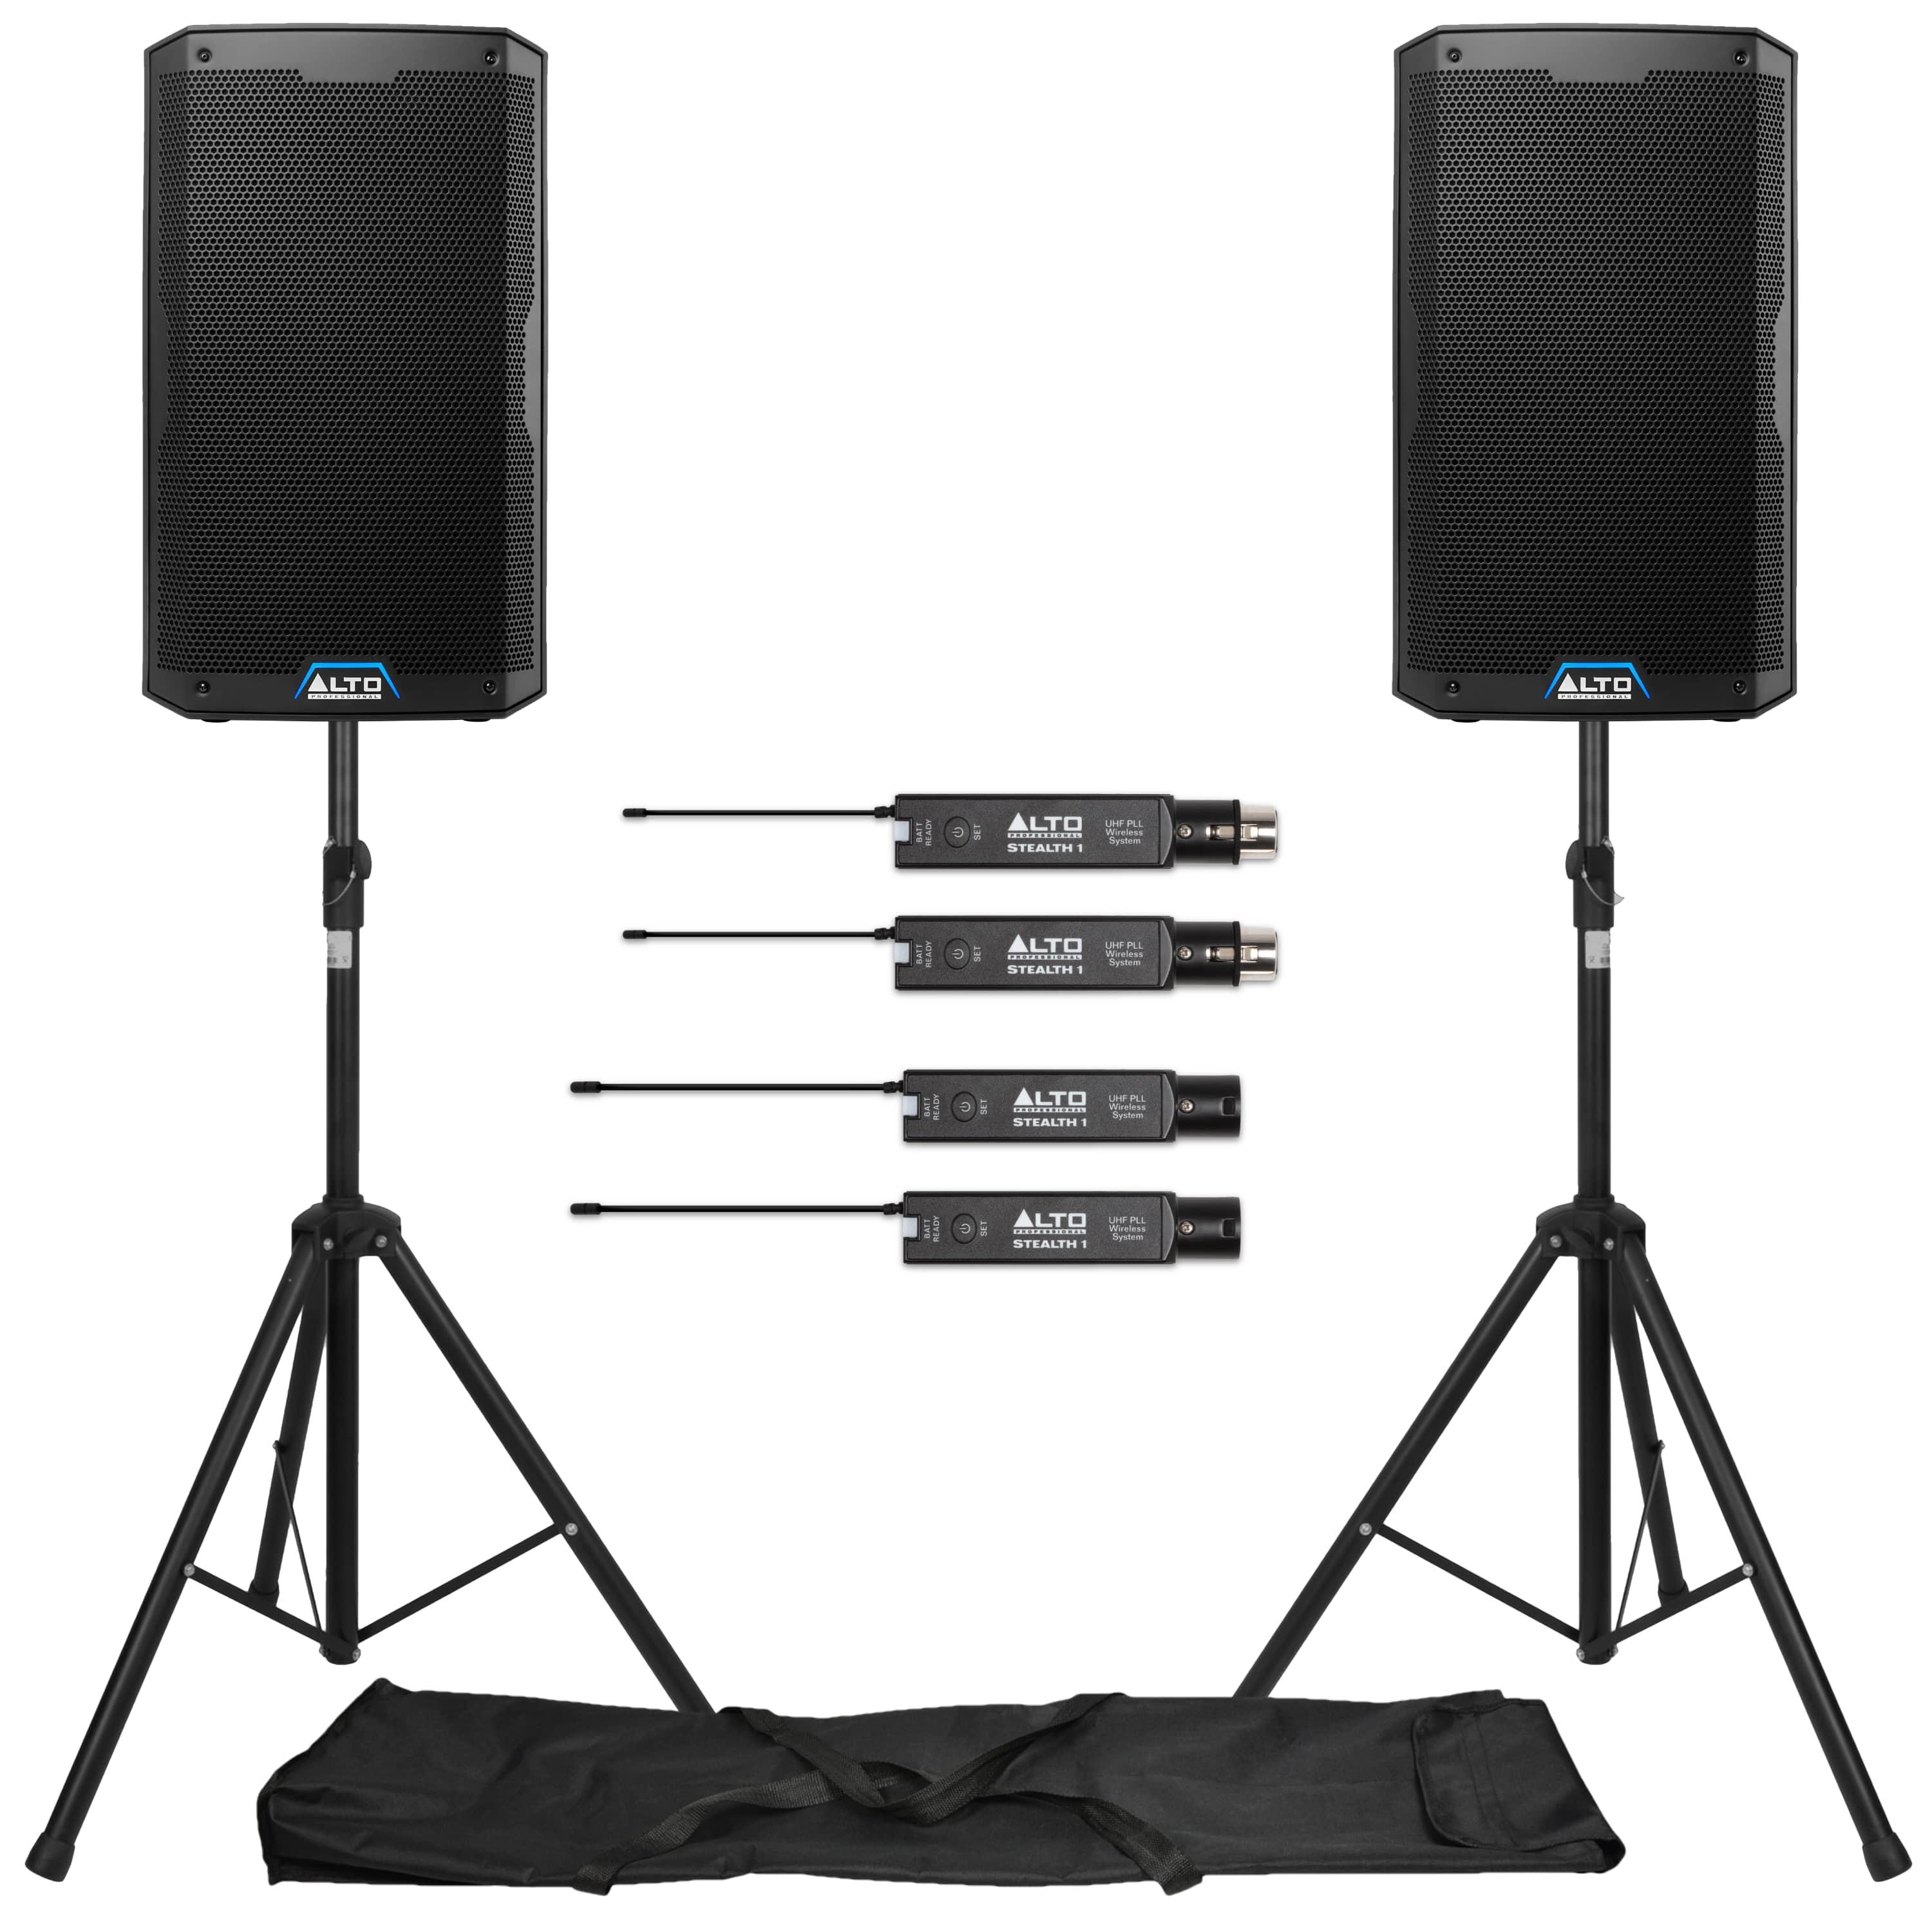 Alto Professional TS410 Wireless Package